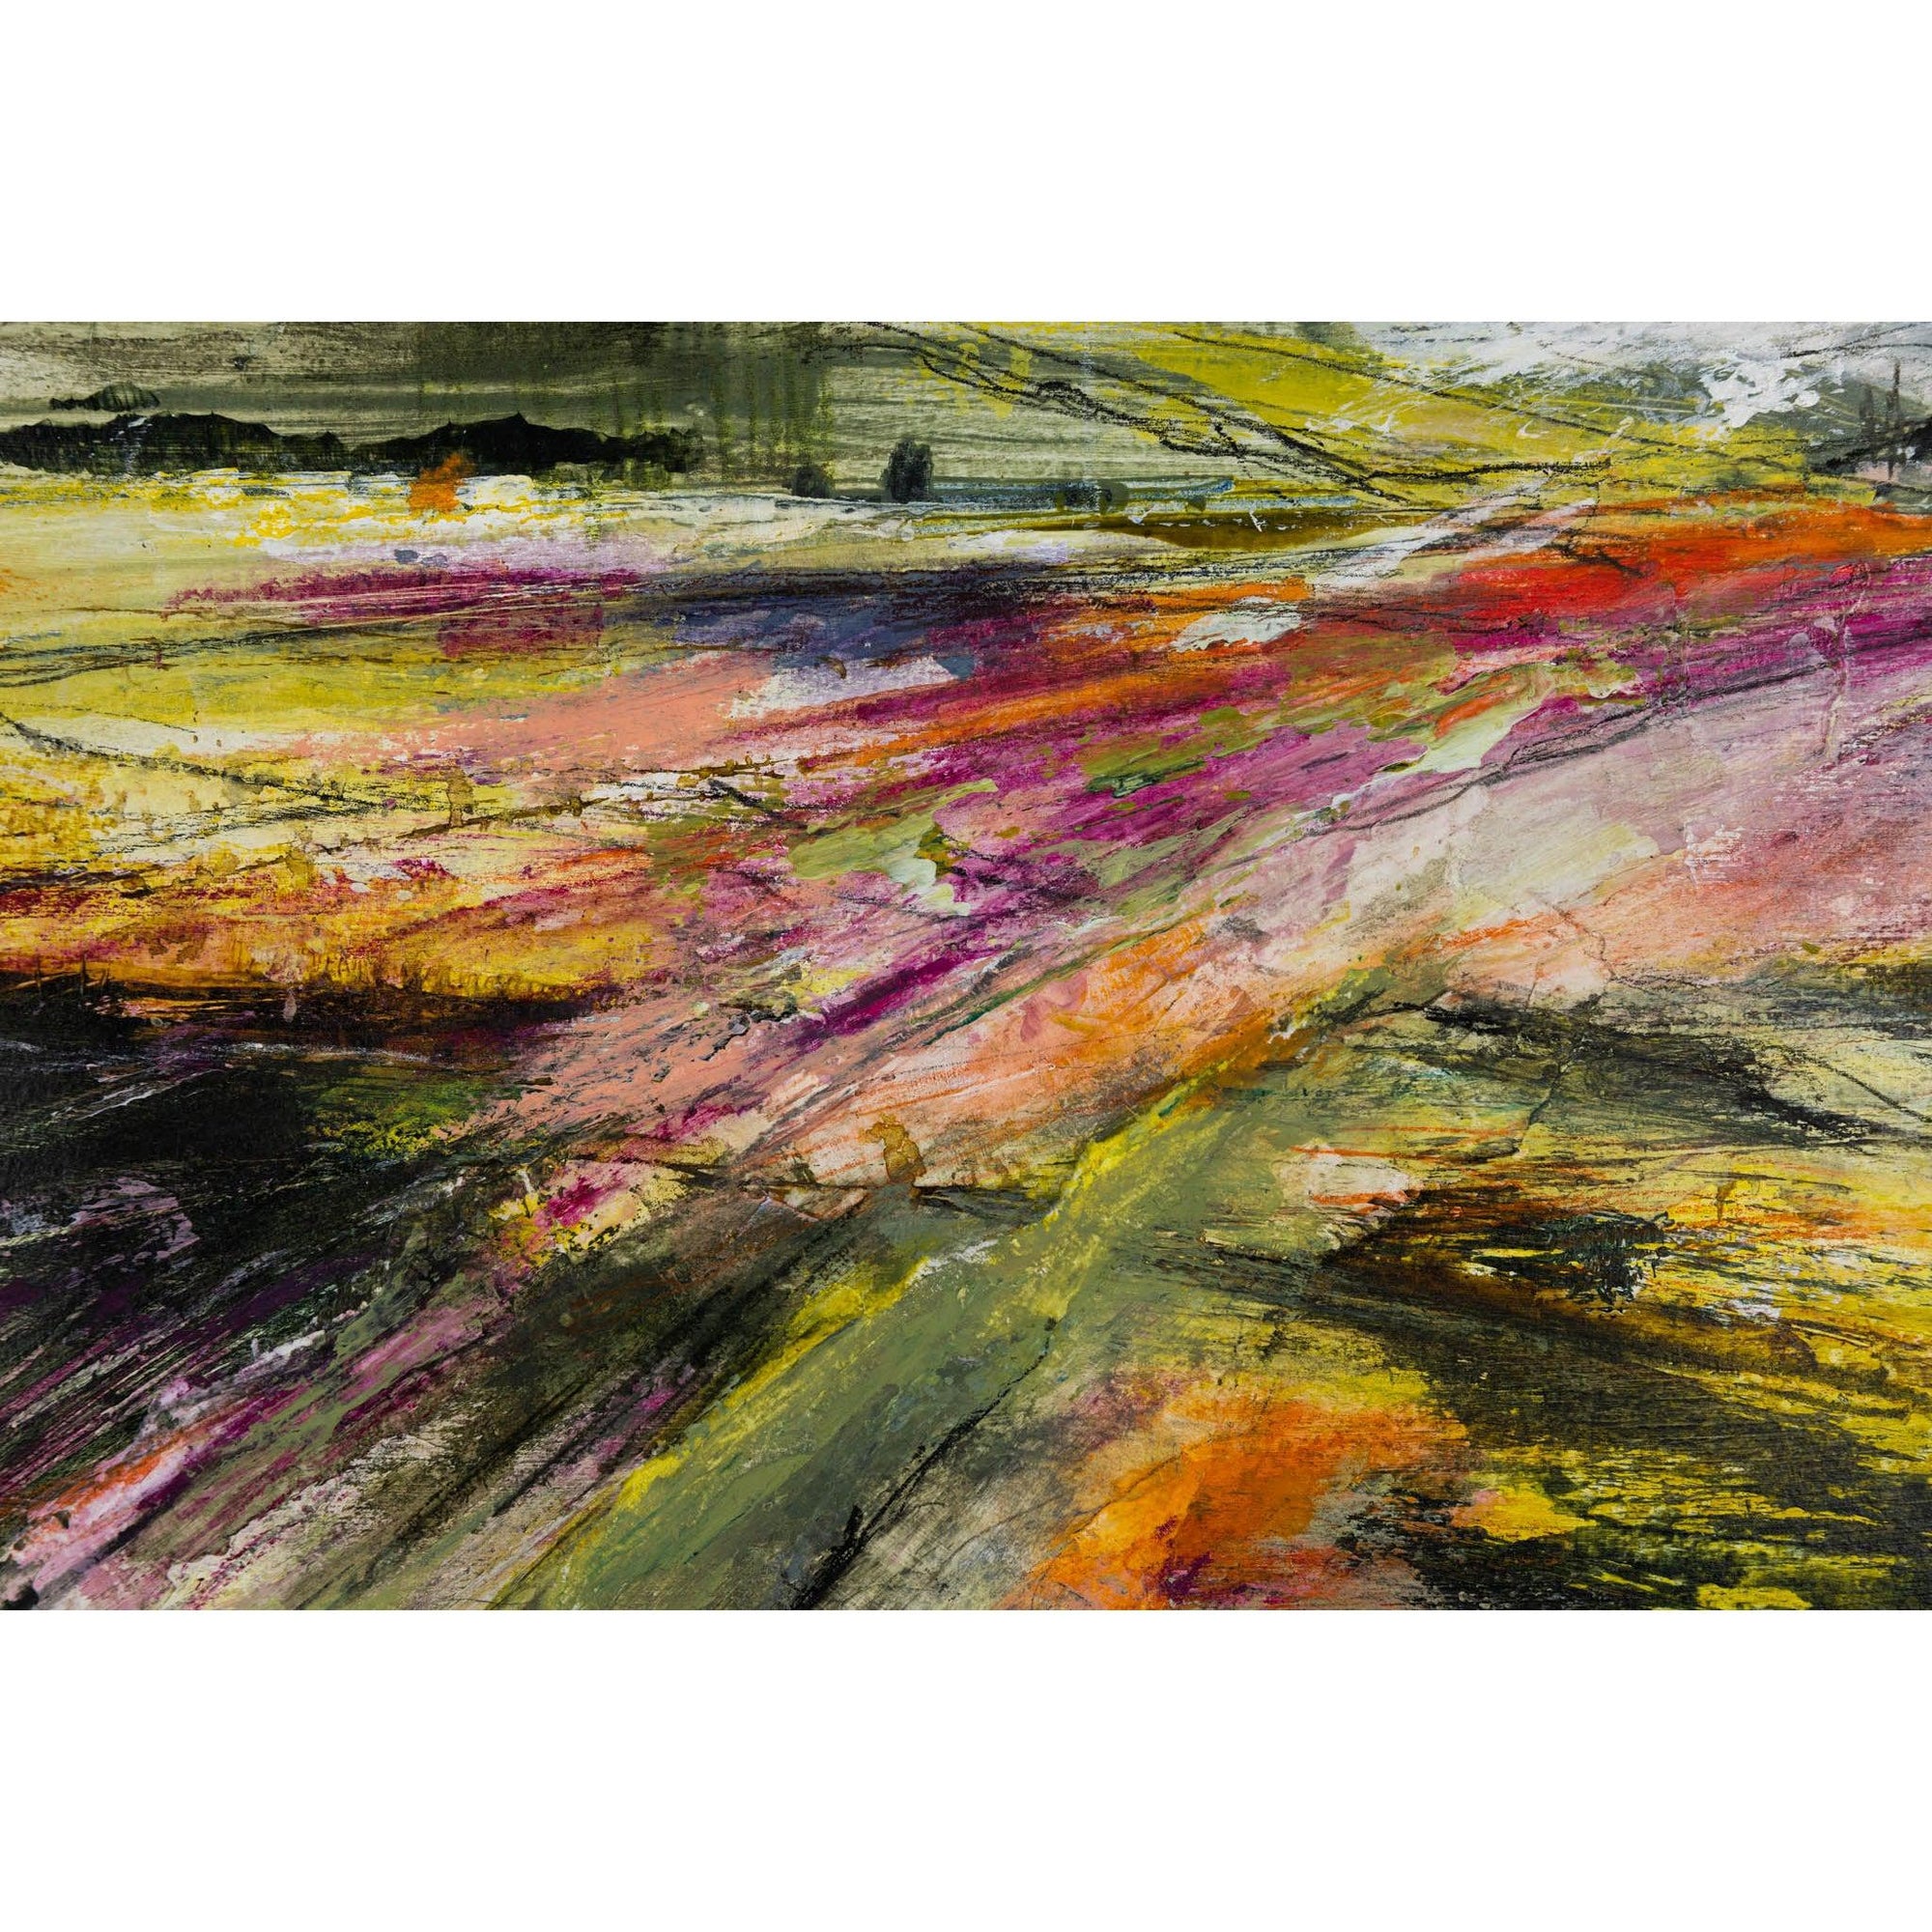 'Fertile land - Combeshead' mixed media original by Sarah Pooley, available at Padstow Gallery, Cornwall.